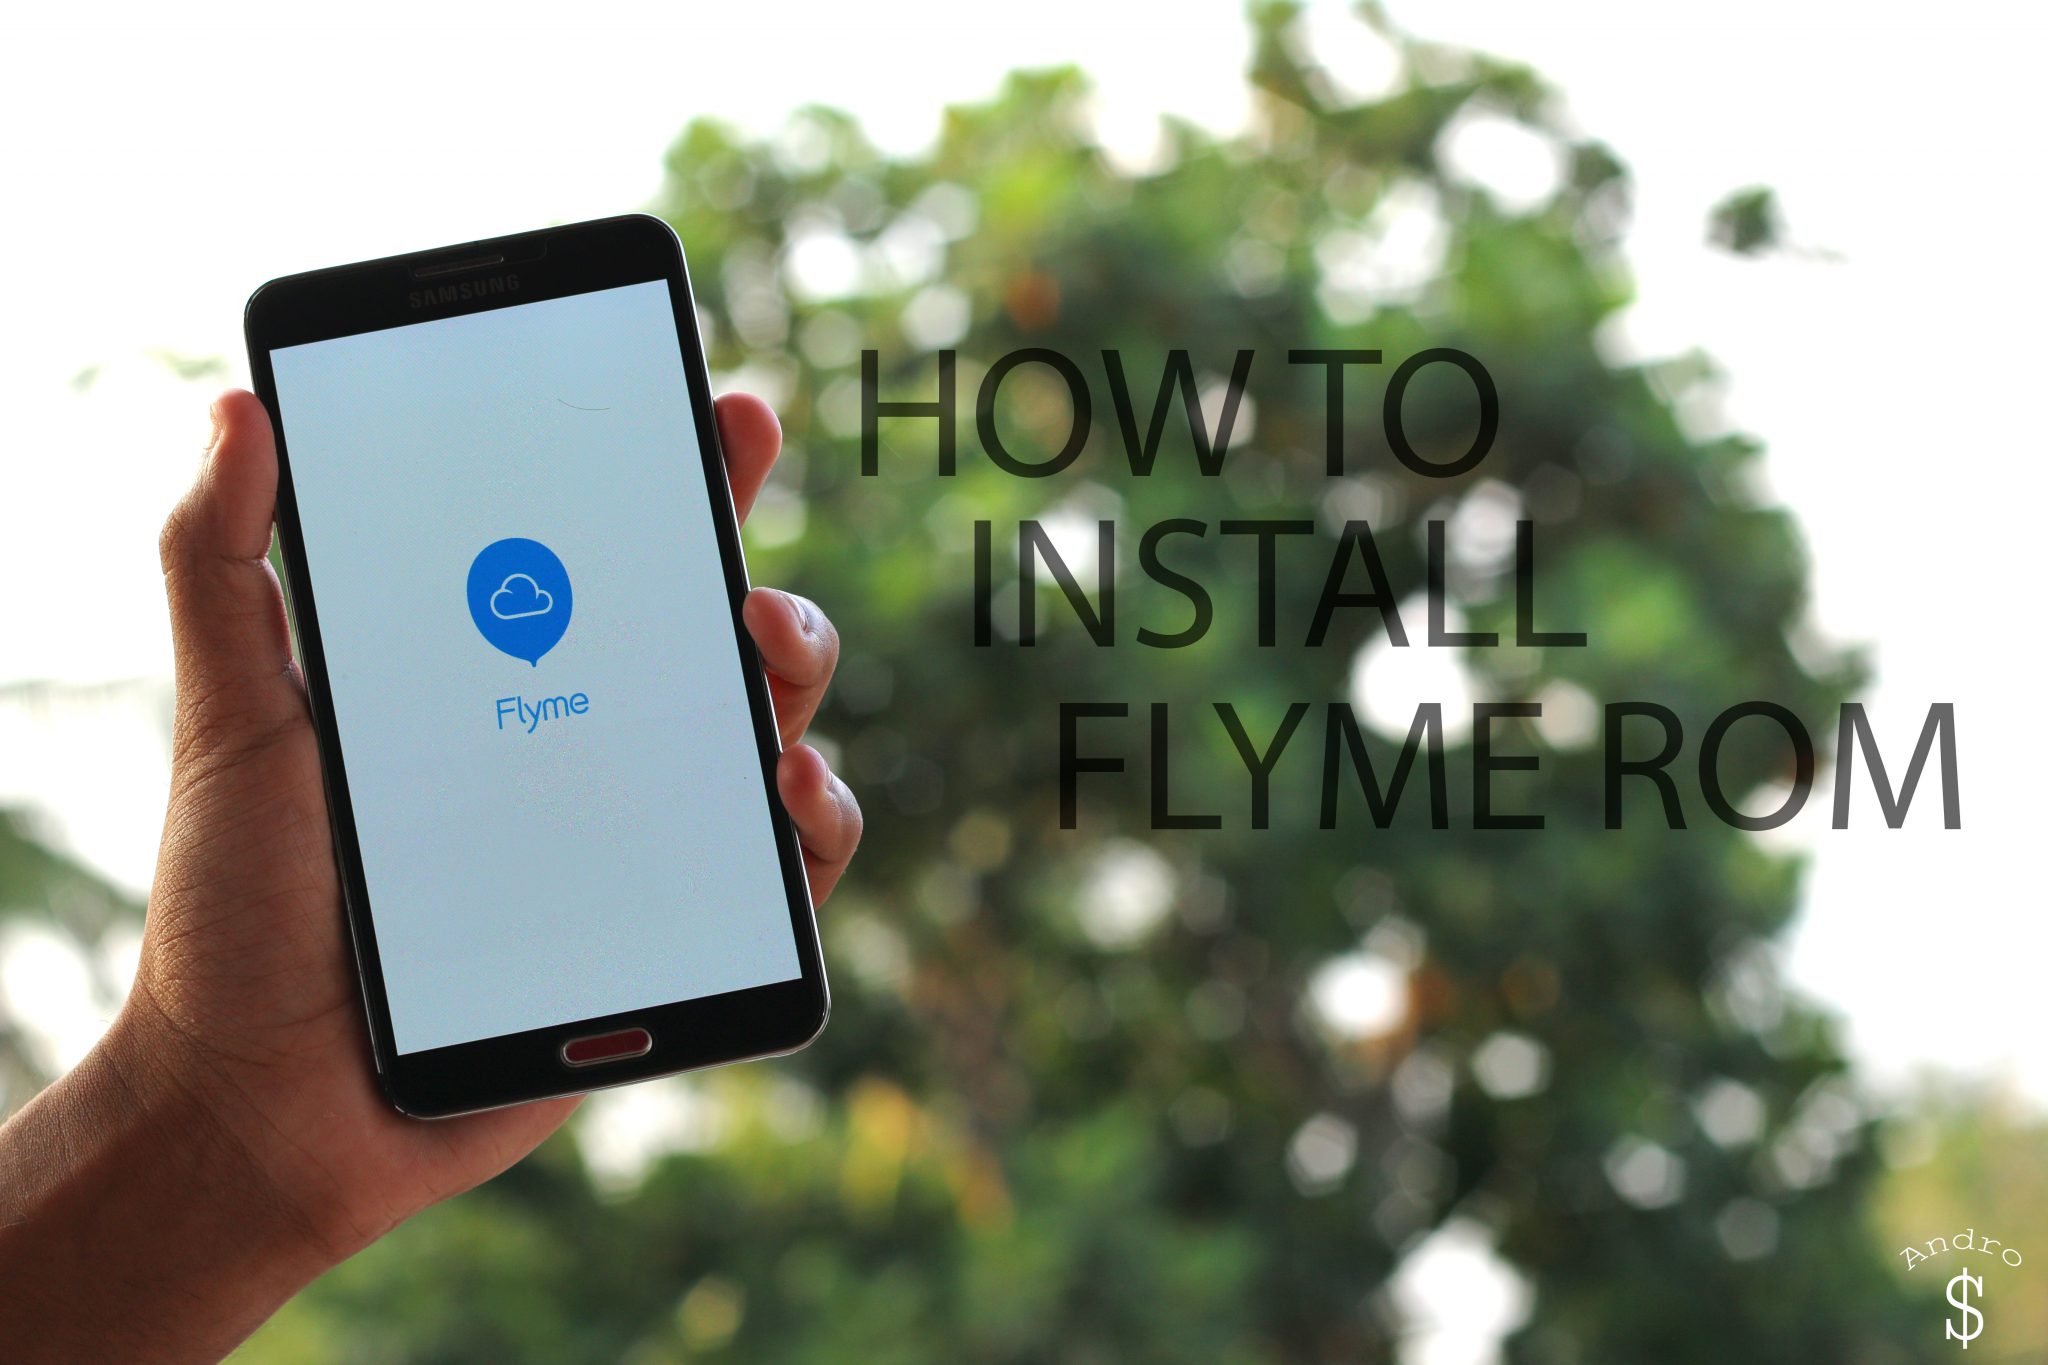 HOW TO INSTALL FLYME ROM